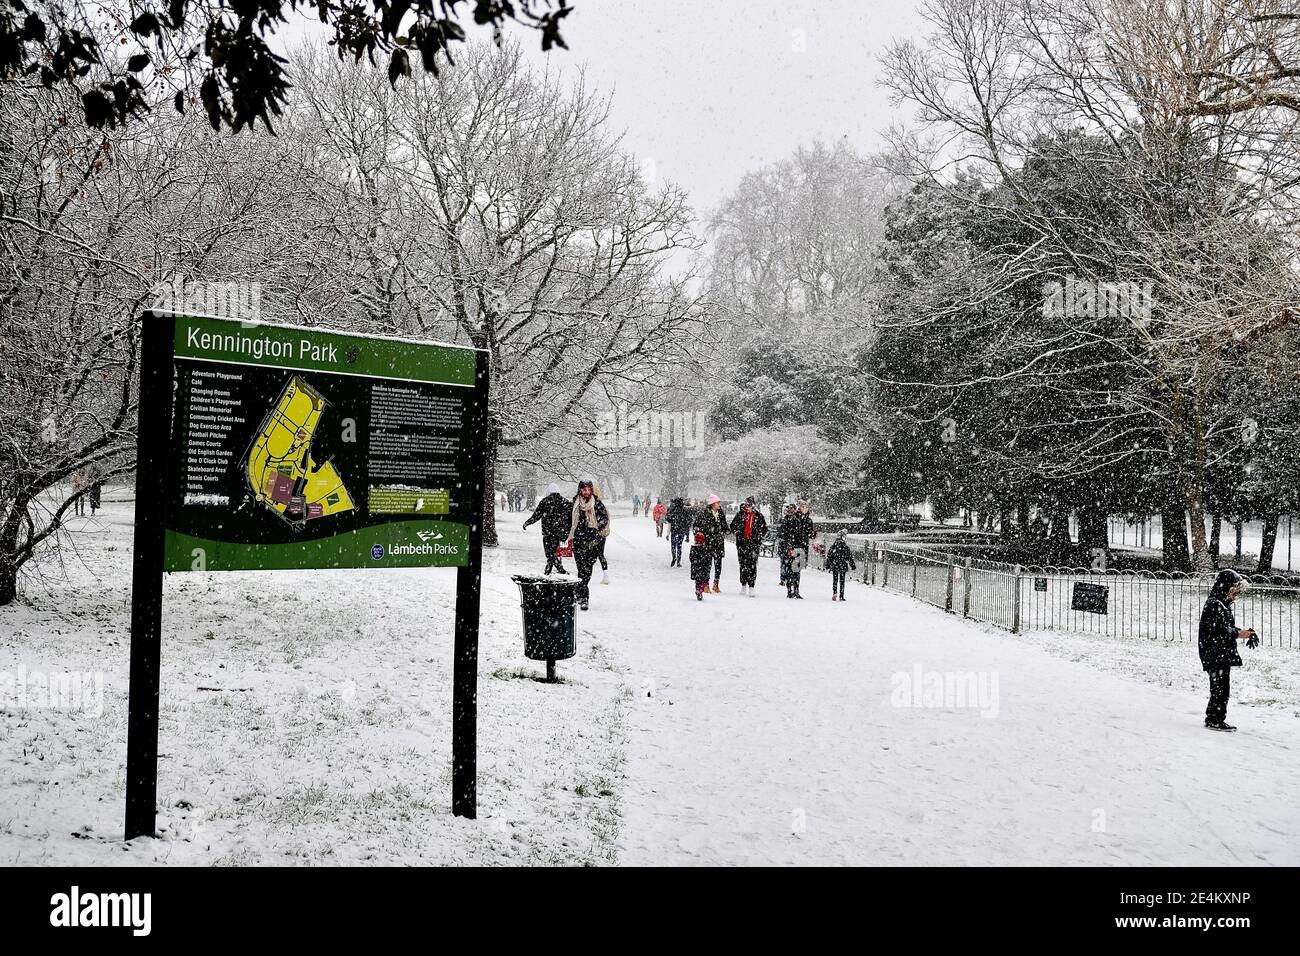 Kennington Park, London, UK. 24th January 2021. People walking in Kennington Park (near south entrance)  at the during heavy snow fall in London, UK. Credit: Harrison Hodgkins/Alamy Live News. Stock Photo